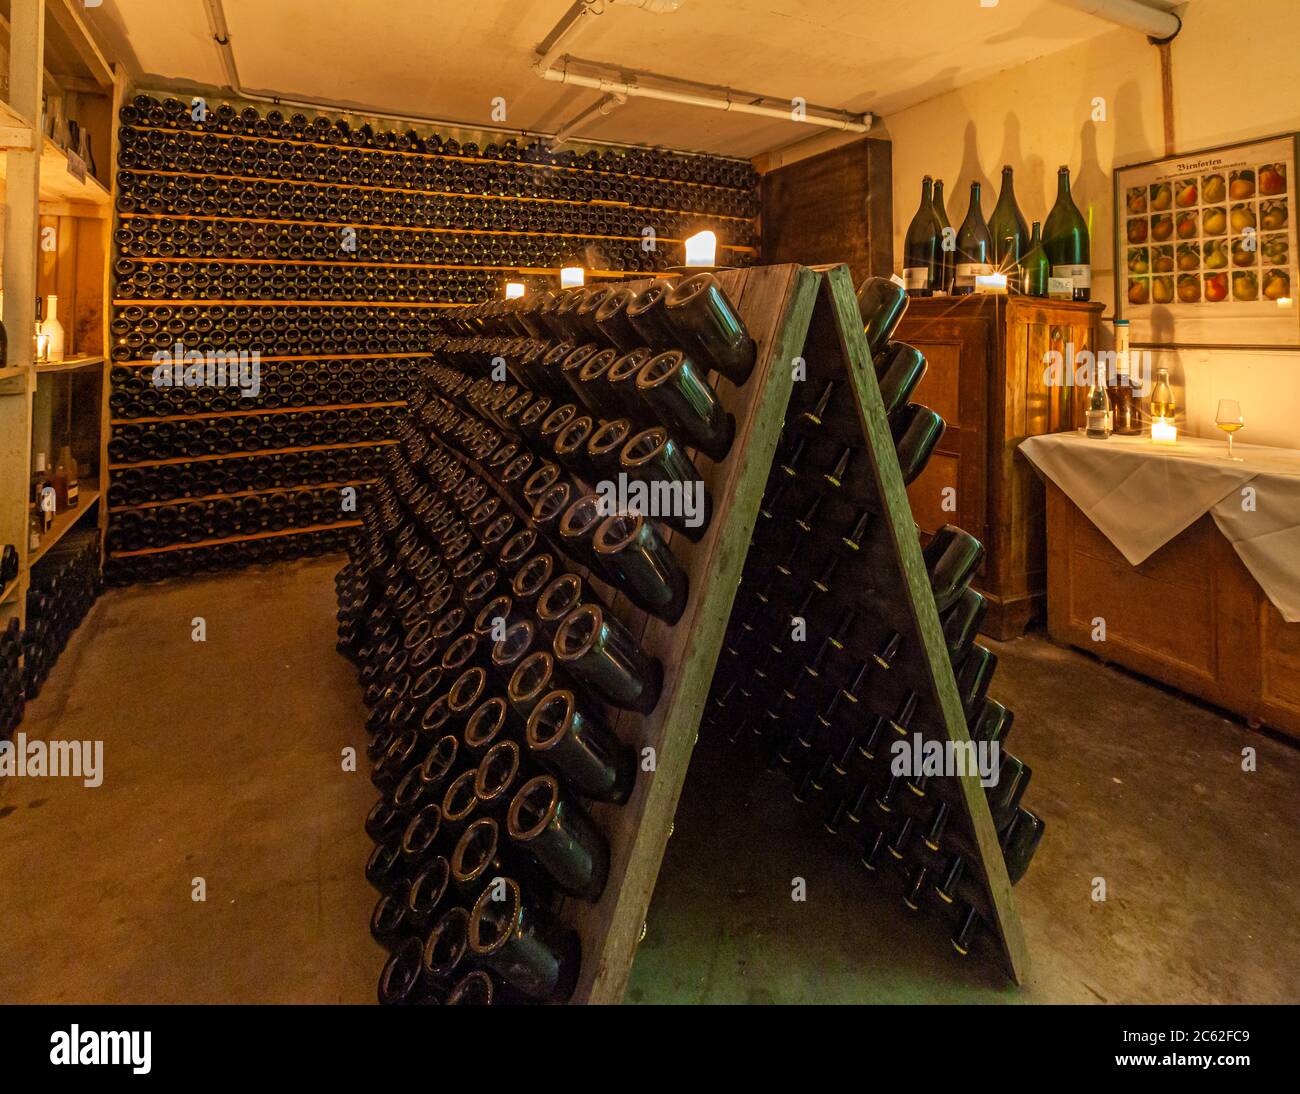 Fine nonalcoholic wines are stored in the cellar of the Jörg Geiger PriSecco Manufactory, Schlat, Germany Stock Photo